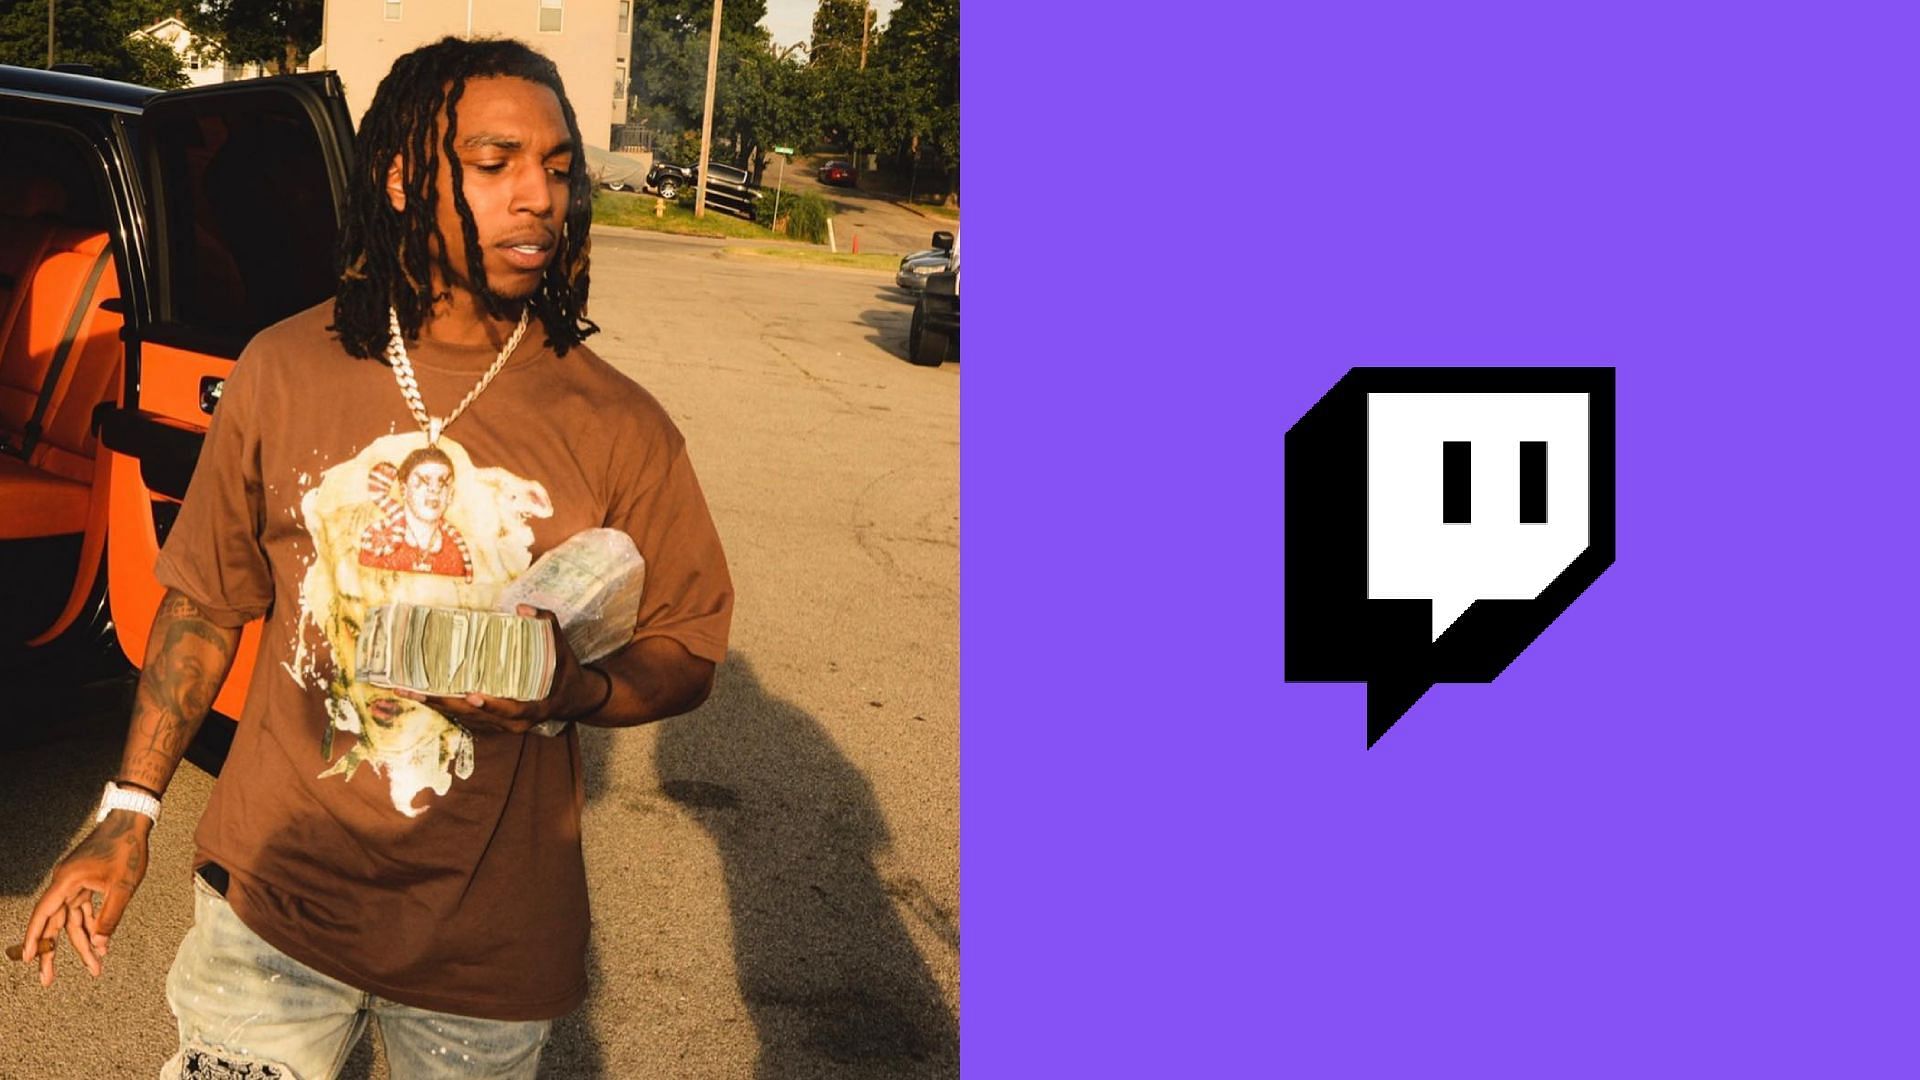 Blou banned from Twitch for indefinite period (Image via B.Lou/Instagram, Twitch.tv